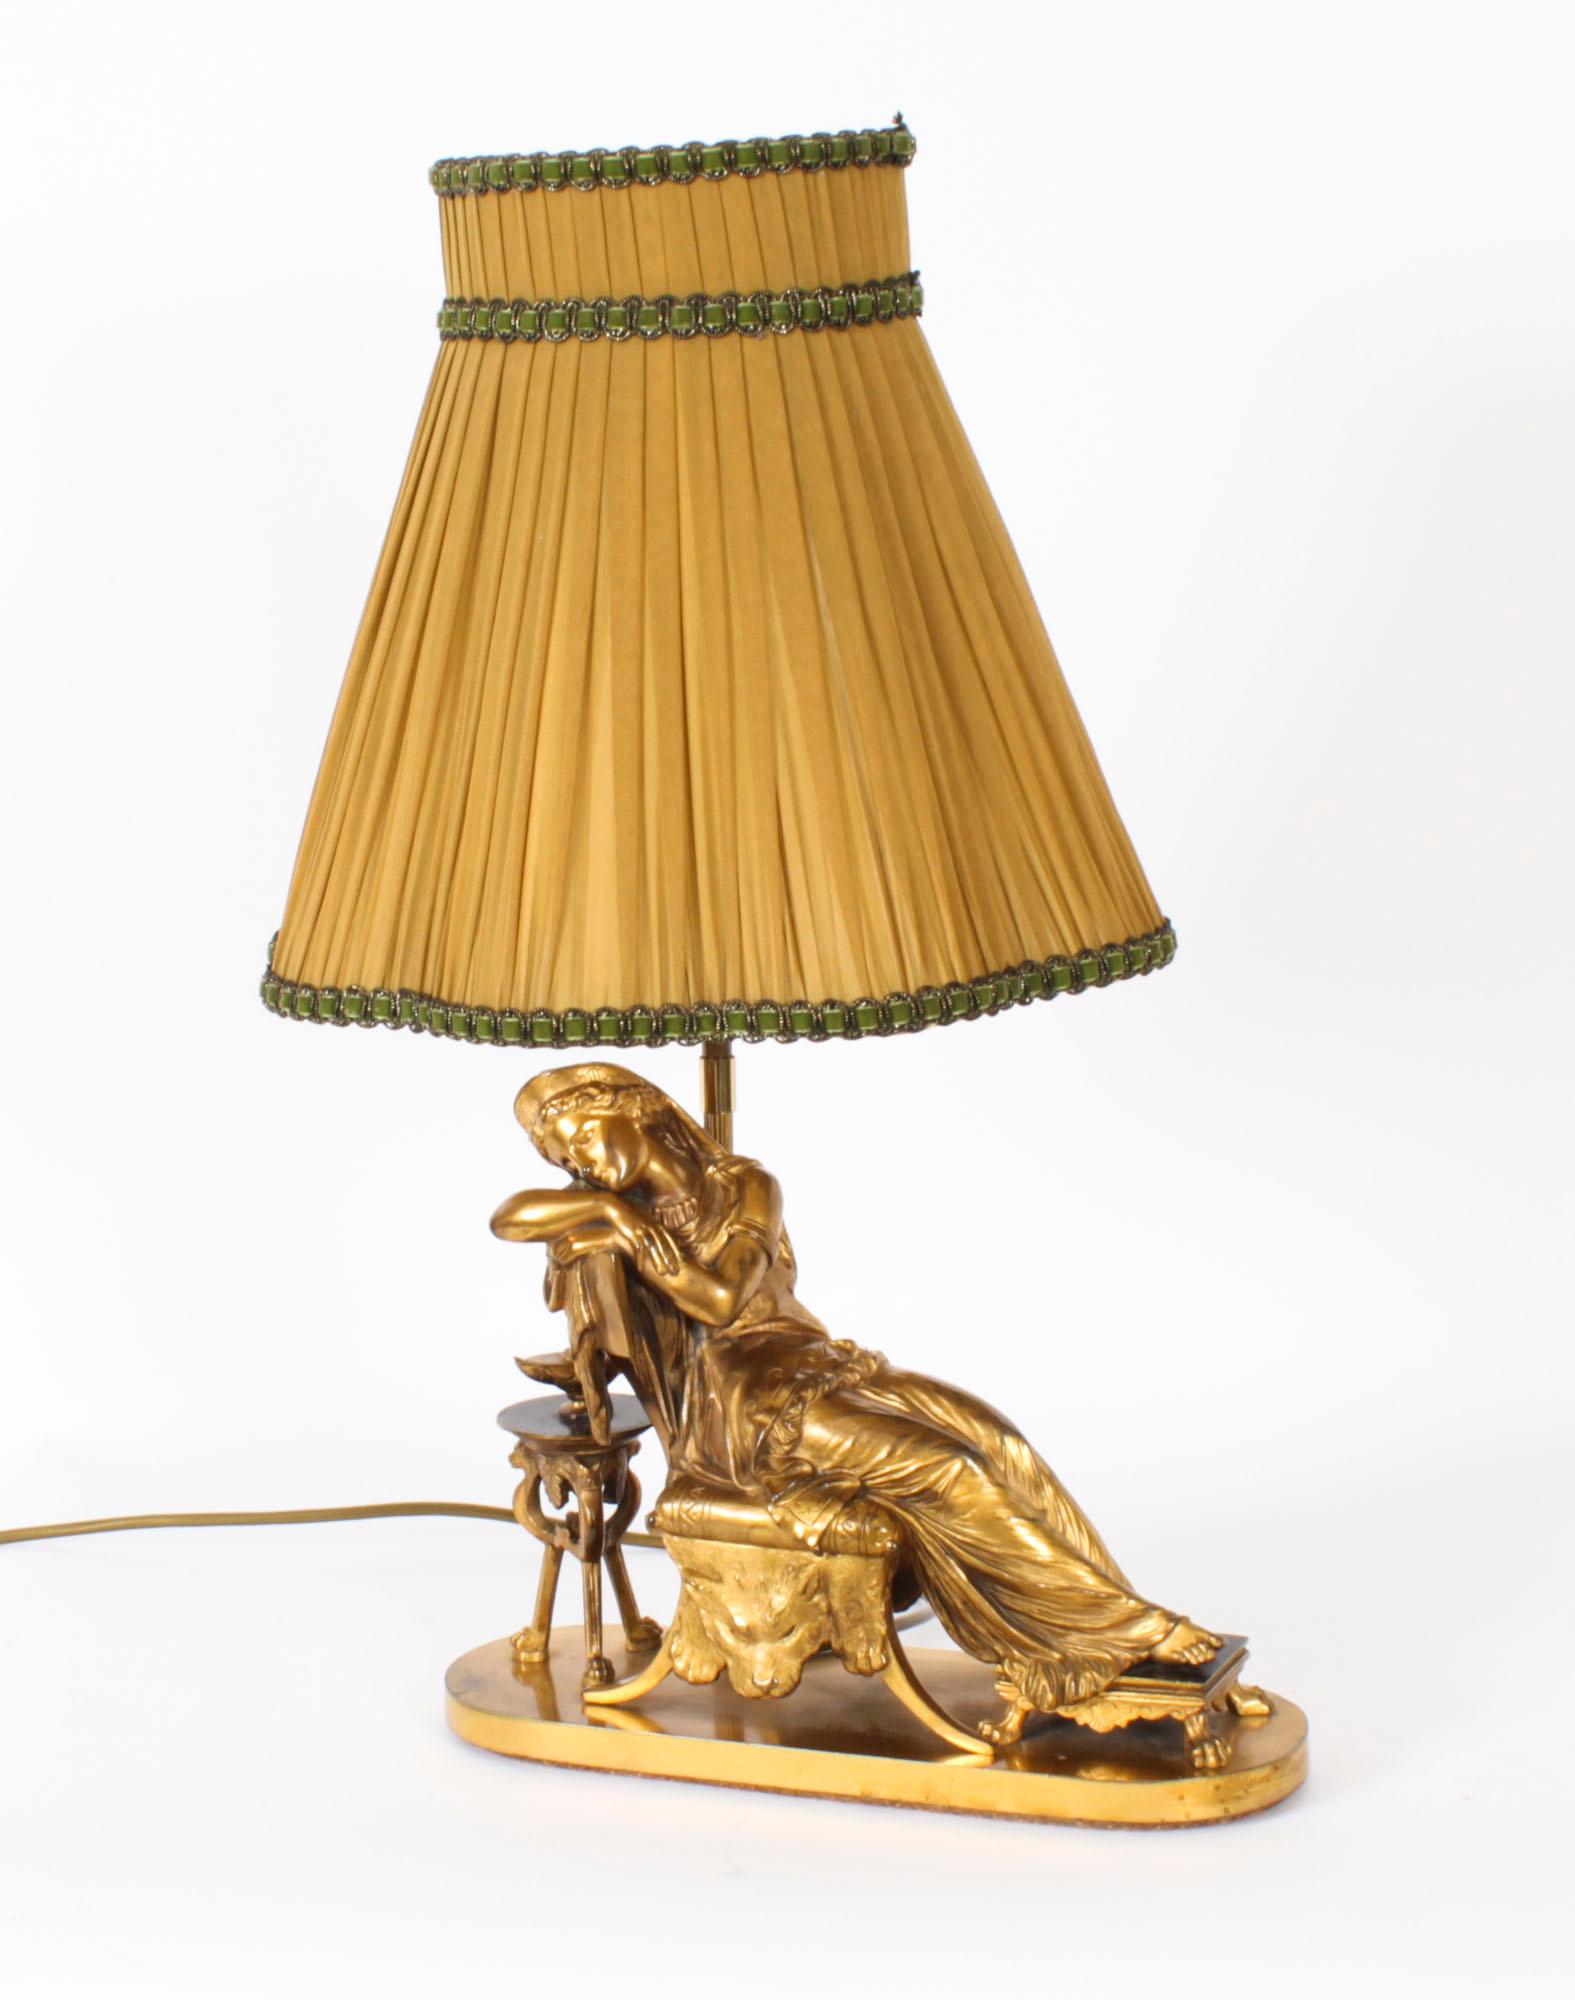 Antique French Ormolu Table Lamp Manner of Pierre-Jules Cavelier 19th Century  For Sale 3